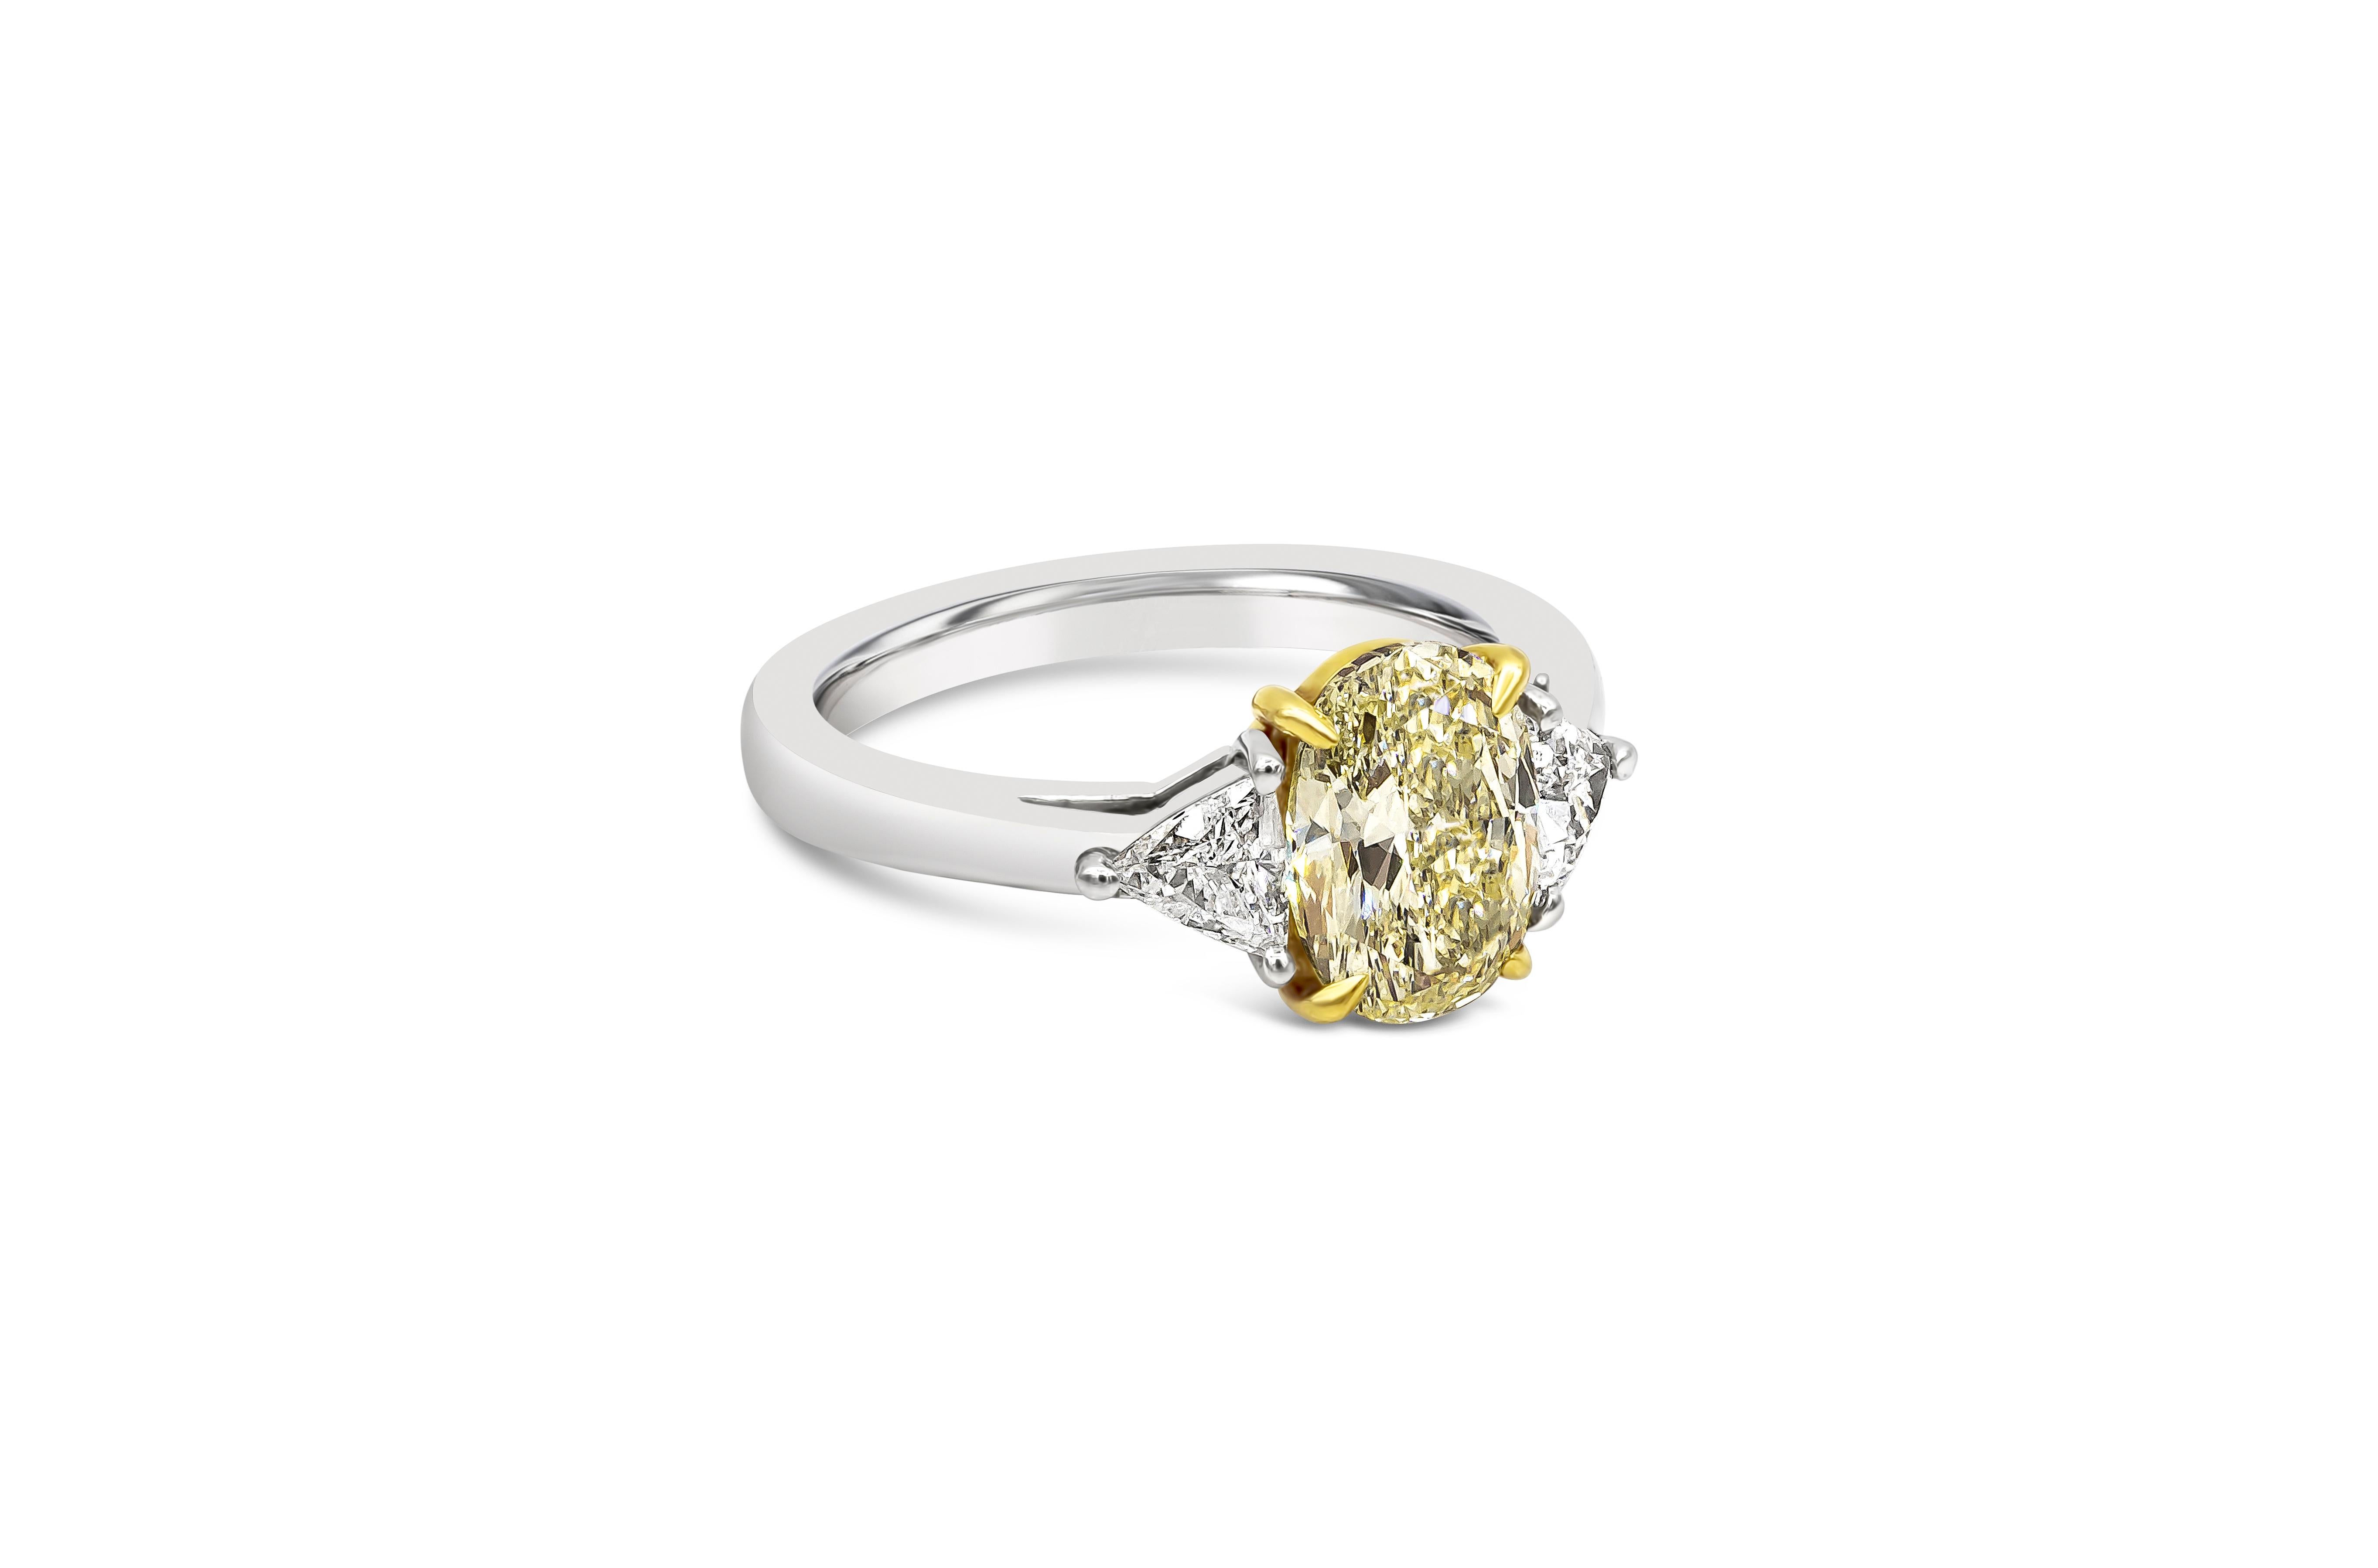 A contemporary three-stone engagement ring style showcasing a 1.87 carat oval cut yellow diamond, certified by GIA as Fancy Light Yellow in color, SI1 clarity. Flanking the center diamond are two brilliant cut trillion diamonds weighing 0.47 carats